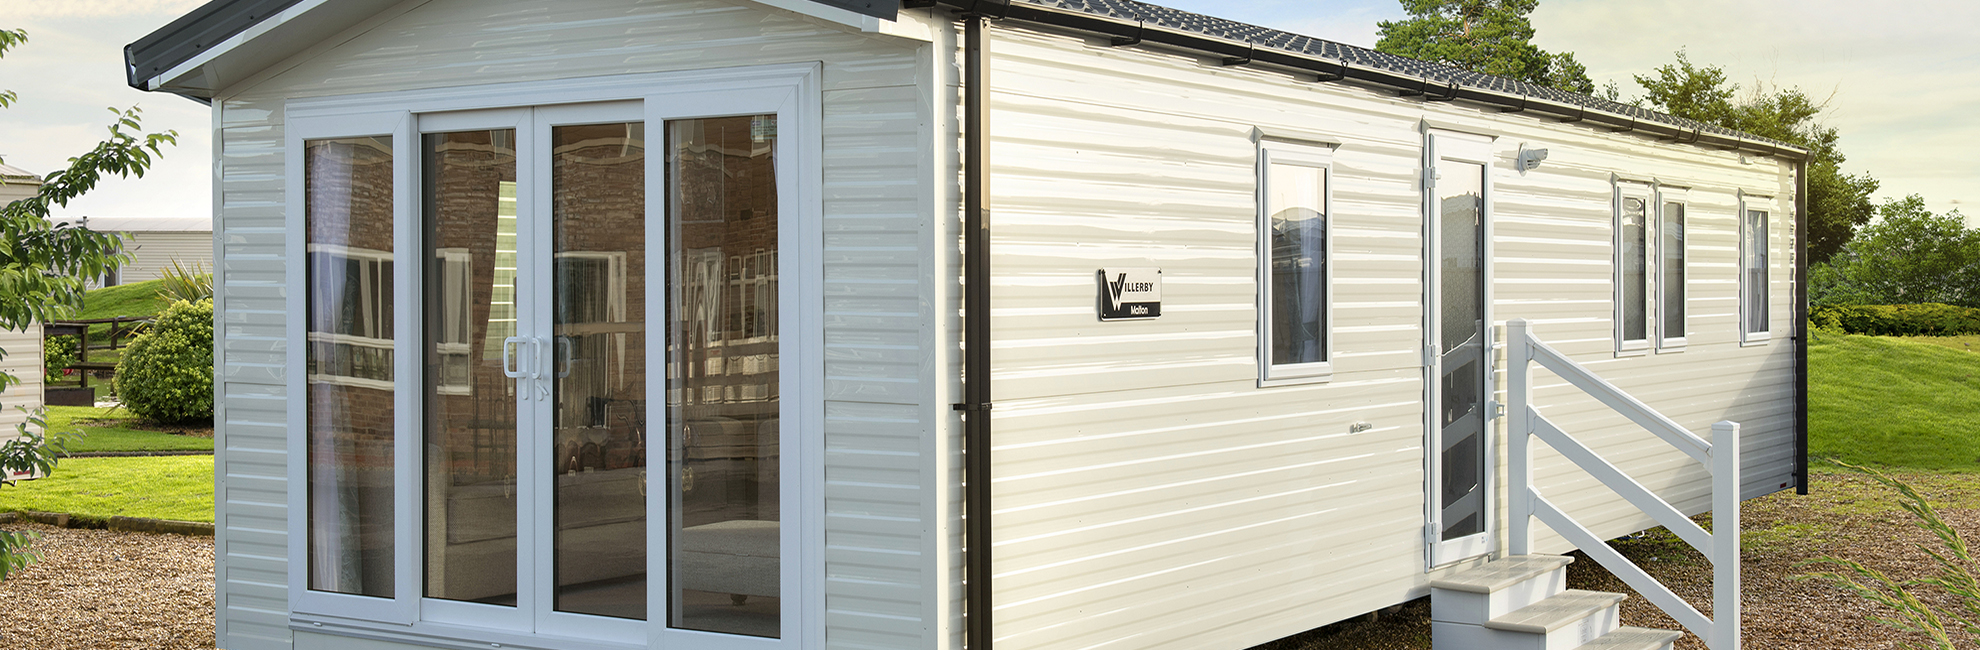 The exterior of the Willerby Malton static caravan